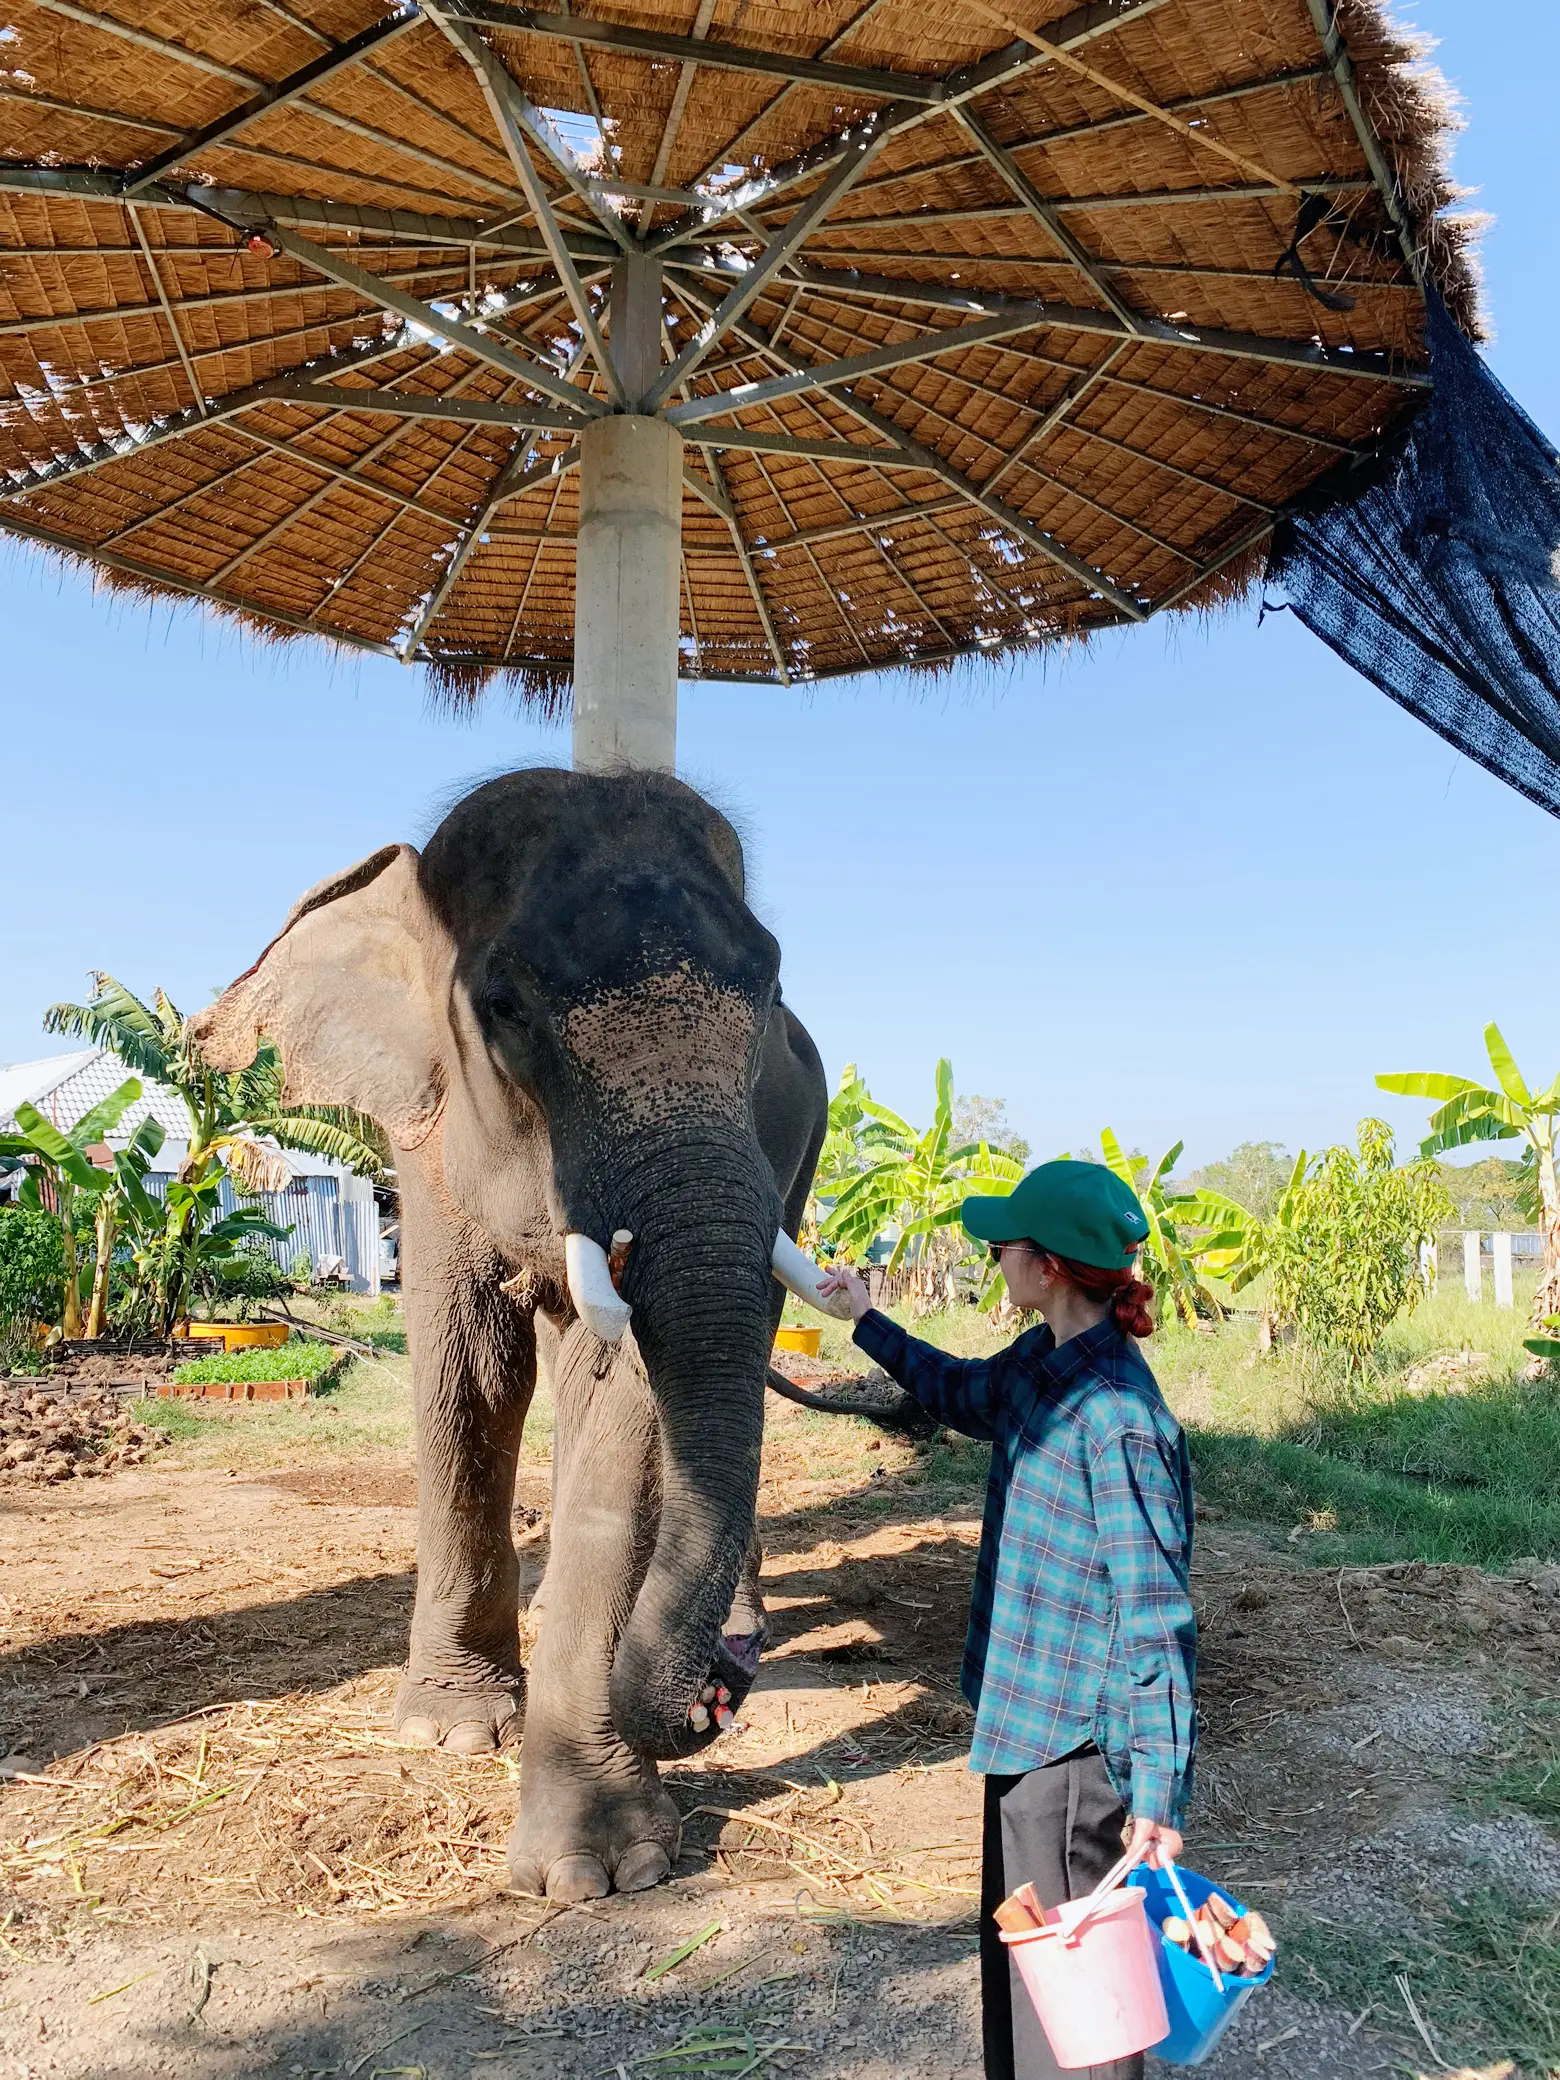 💚Dress up to feed the elephant. 🐘 🥰, Gallery posted by ff